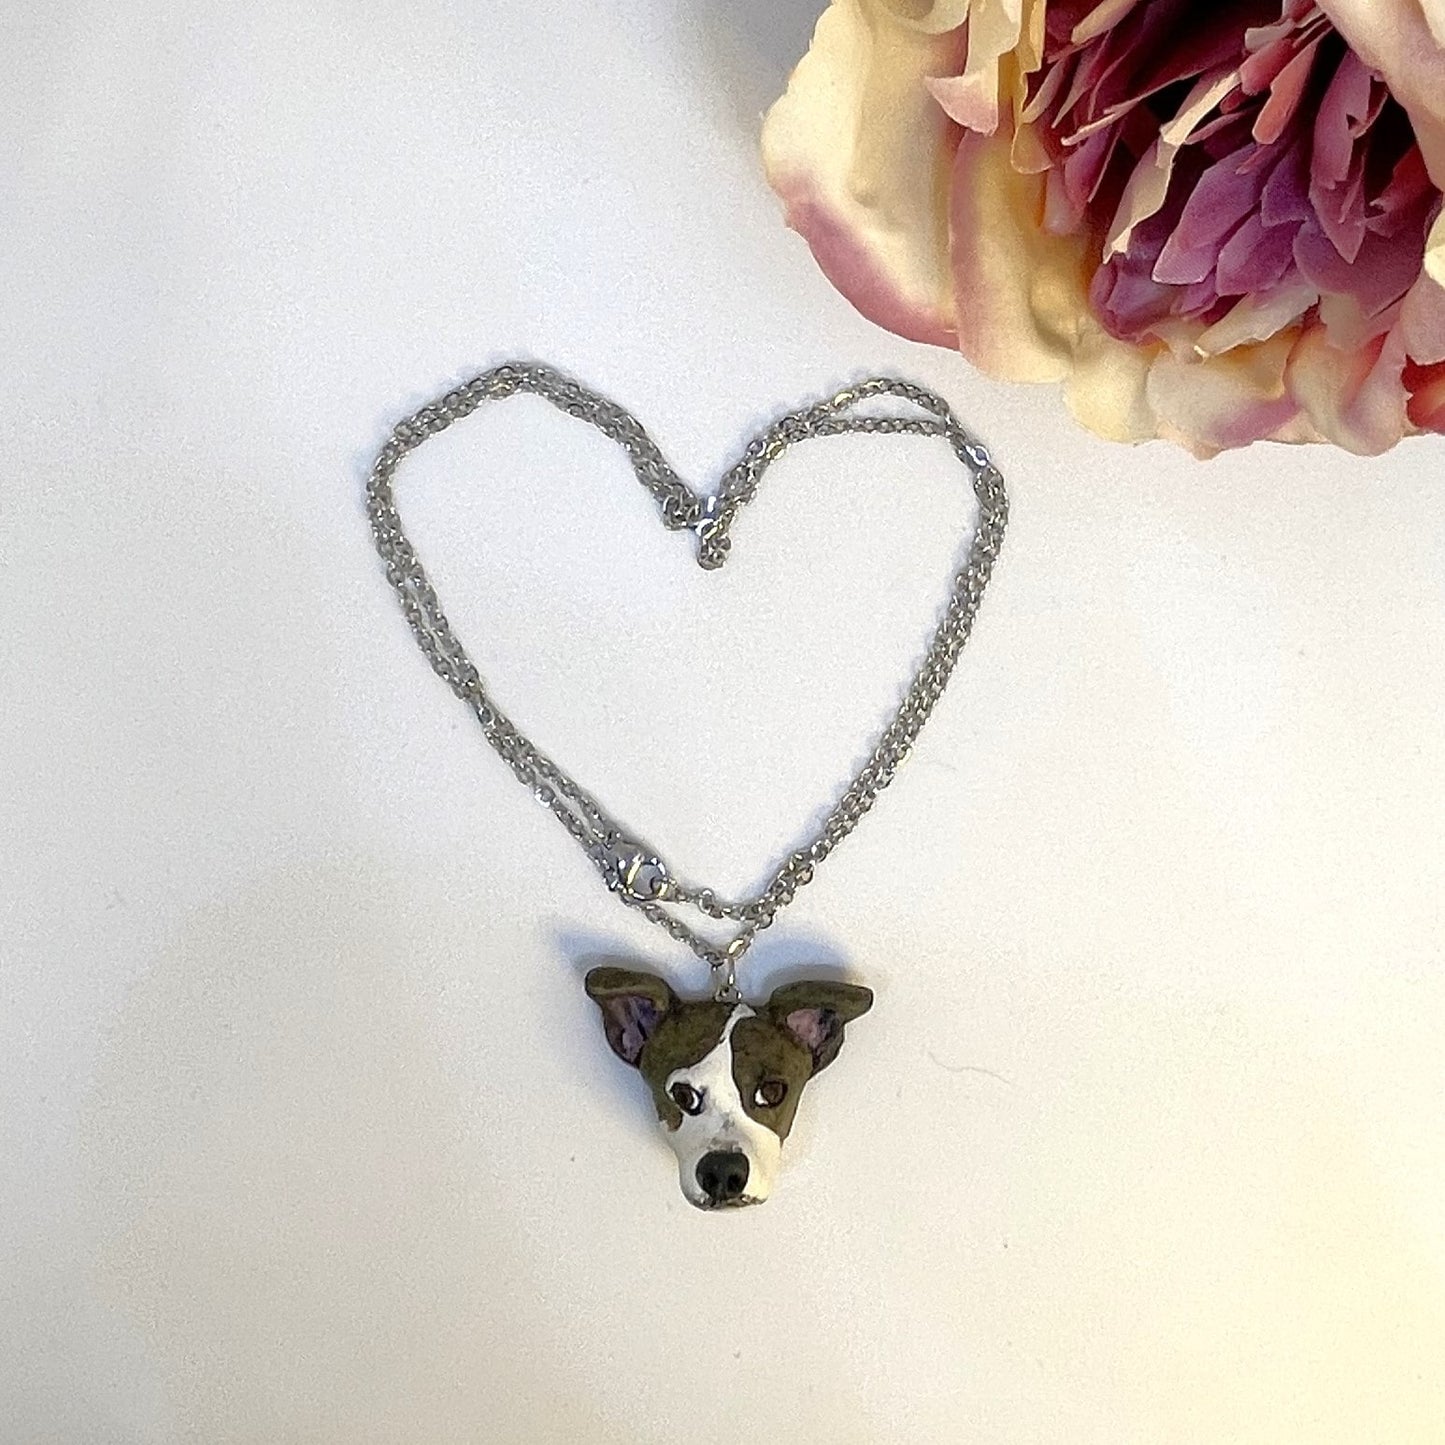 Handmade custom brown and white dog necklace pendant on chain arranged in a heart shape, in front of faux pink flower.